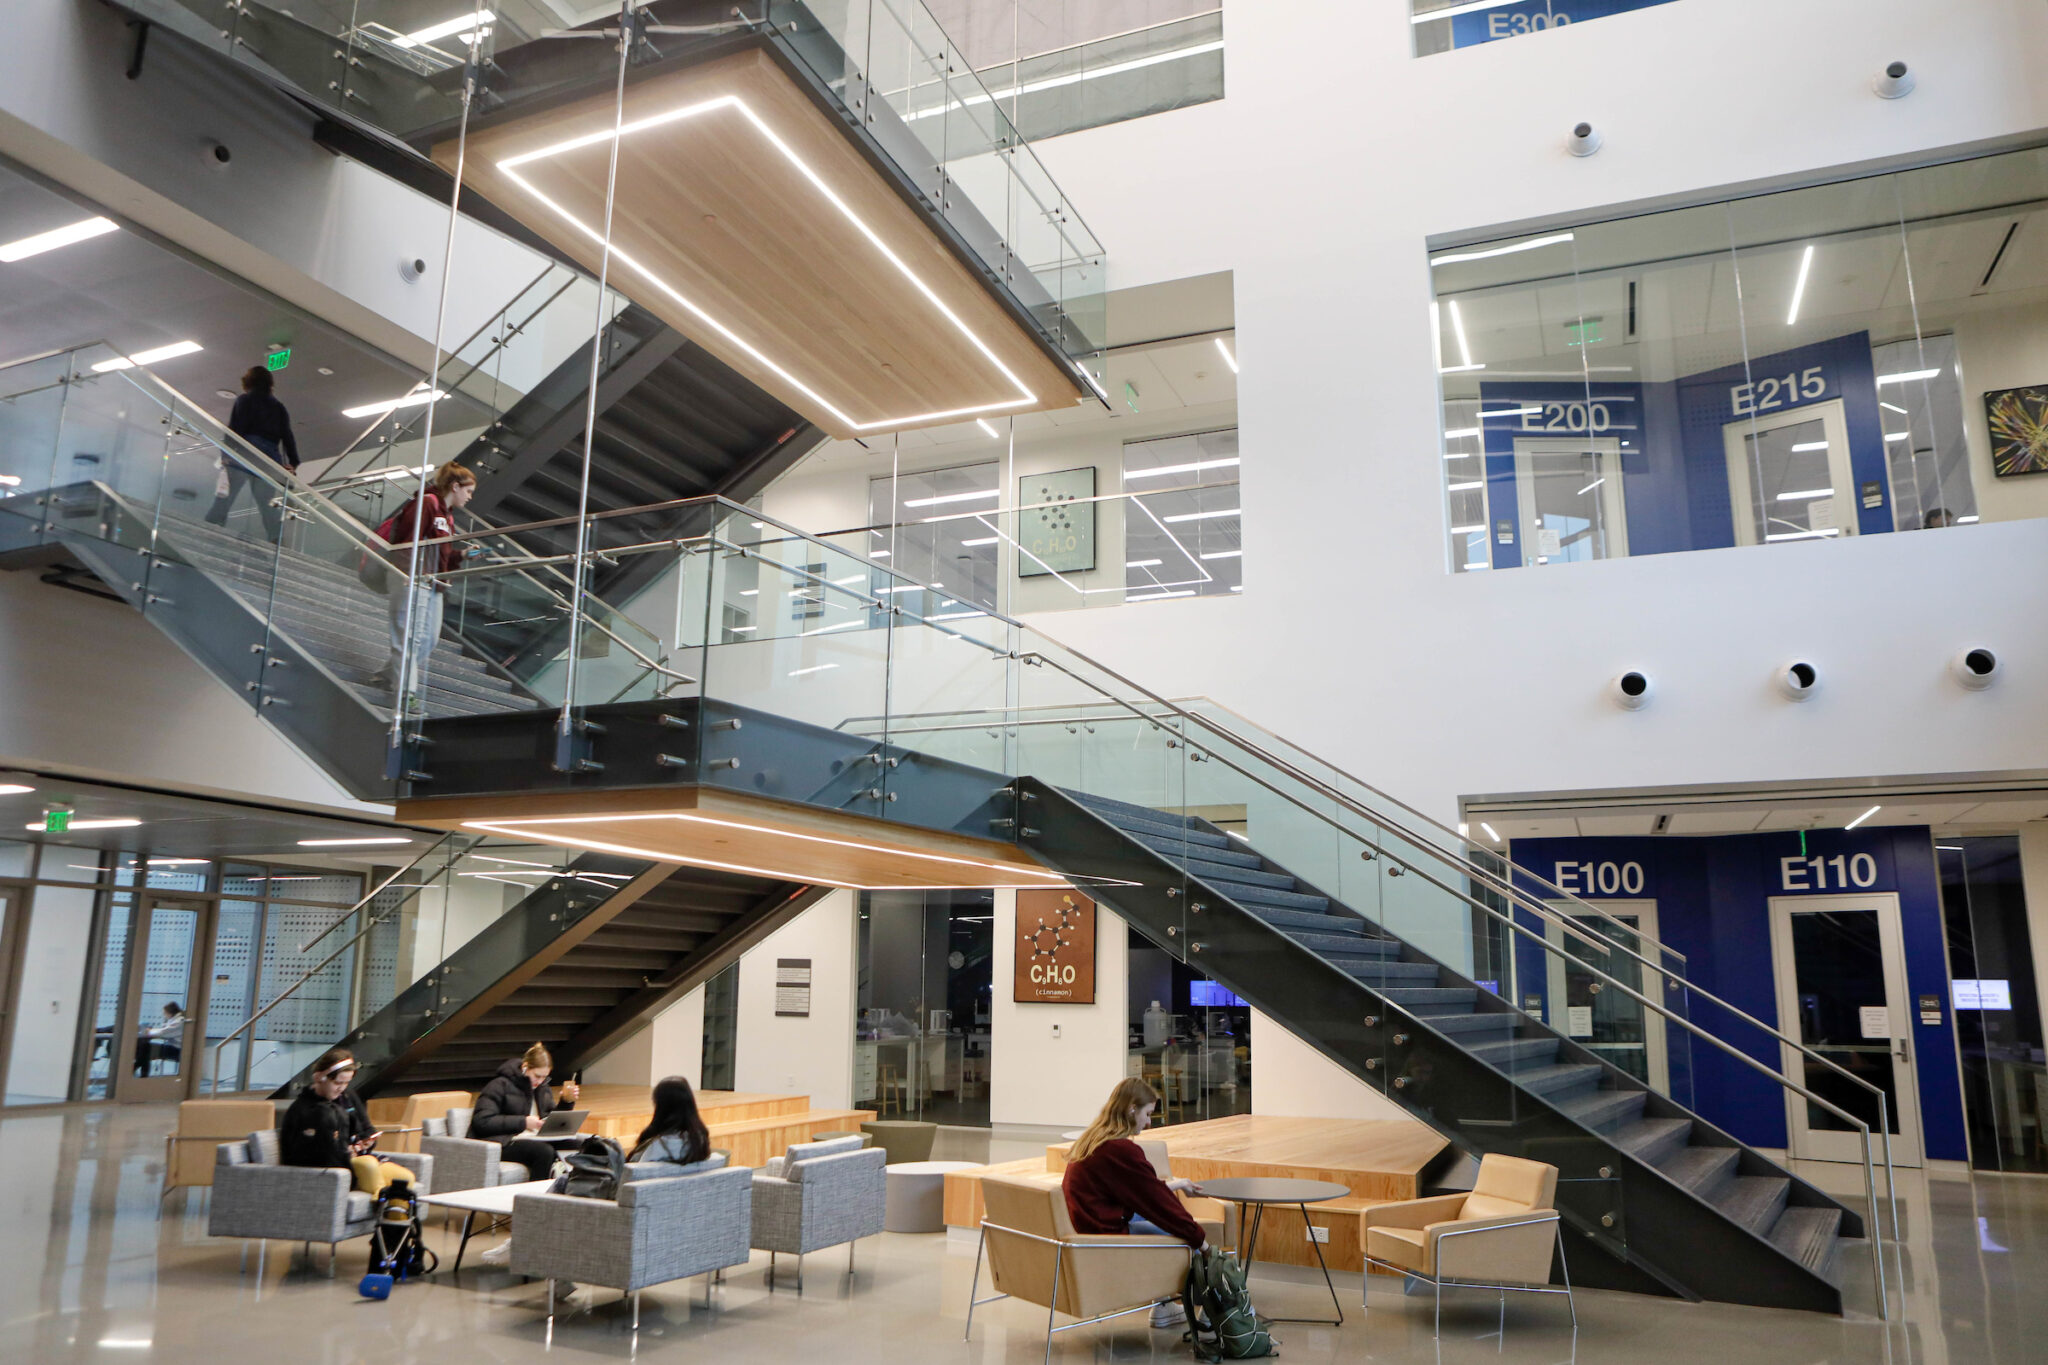 Interior view of the Instructional Laboratory and Innovative Learning Building at Texas A&M University featuring students seated in the foyer, a two-way staircase, and partial views of the building’s first two floors